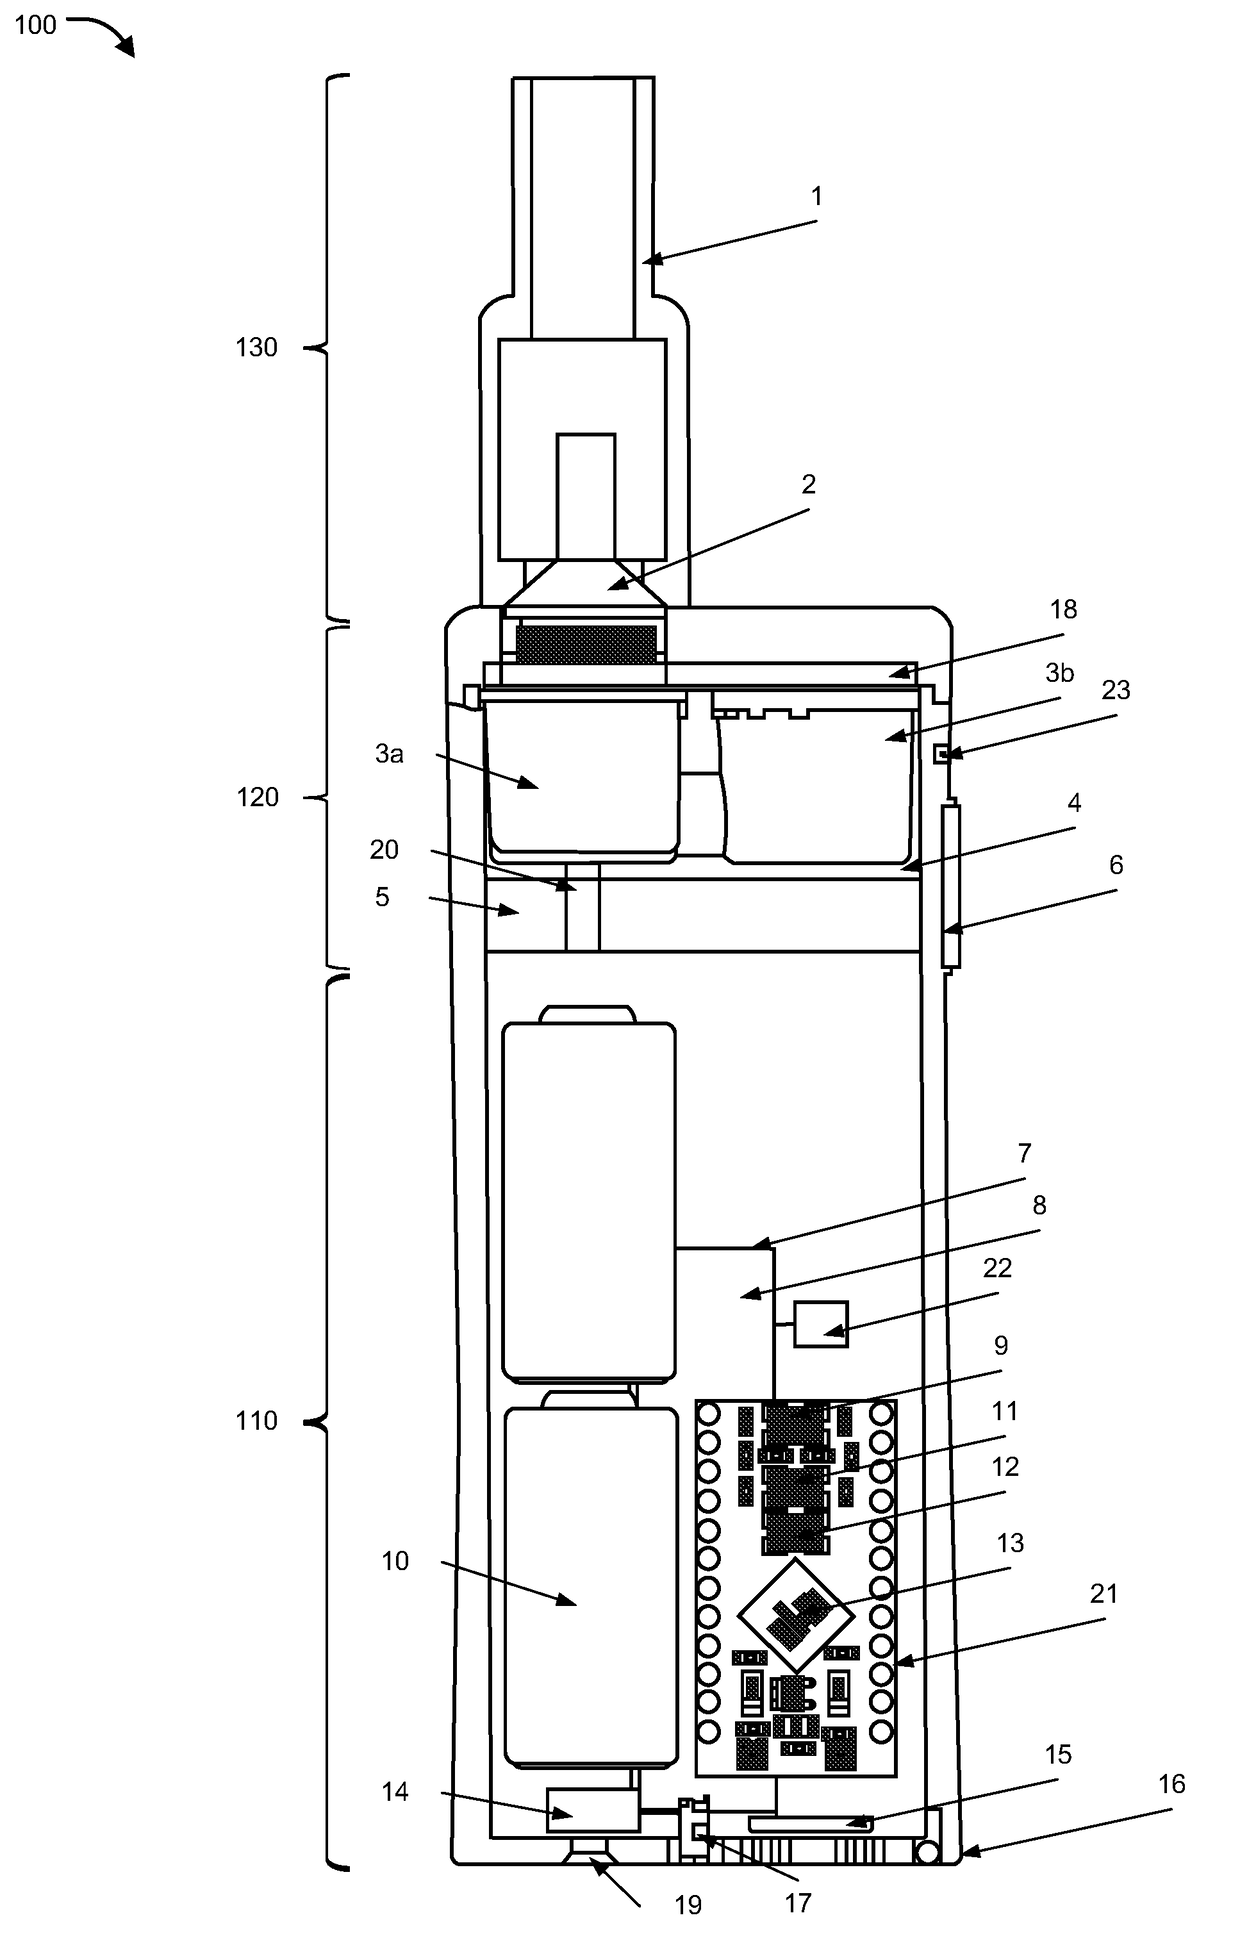 Inhalation device, system and method